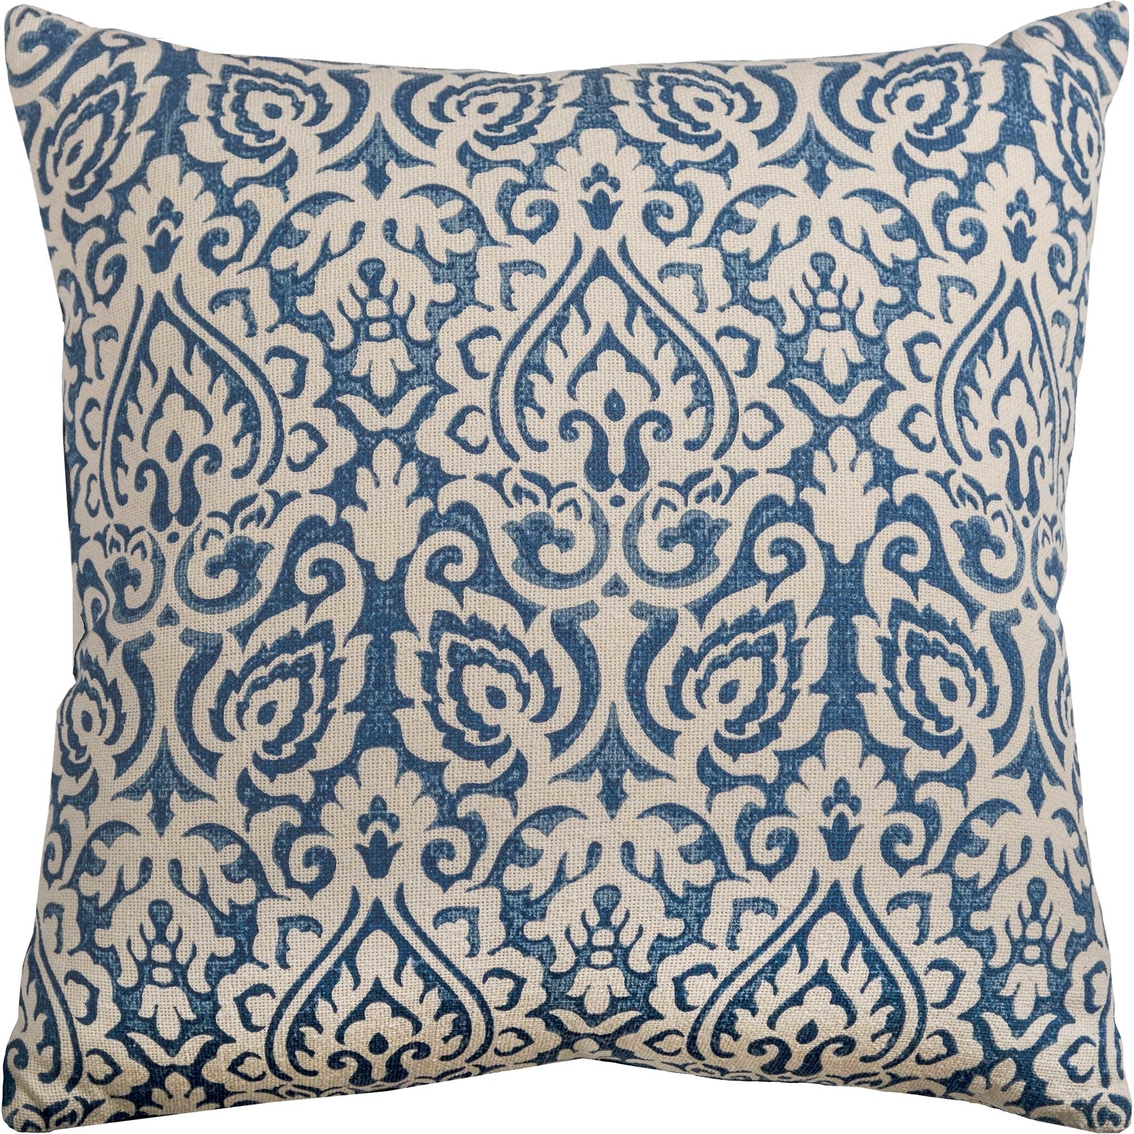 Rizzy Home Damask 22 x 22 in. Polyester Filled Pillow - Image 1 of 3